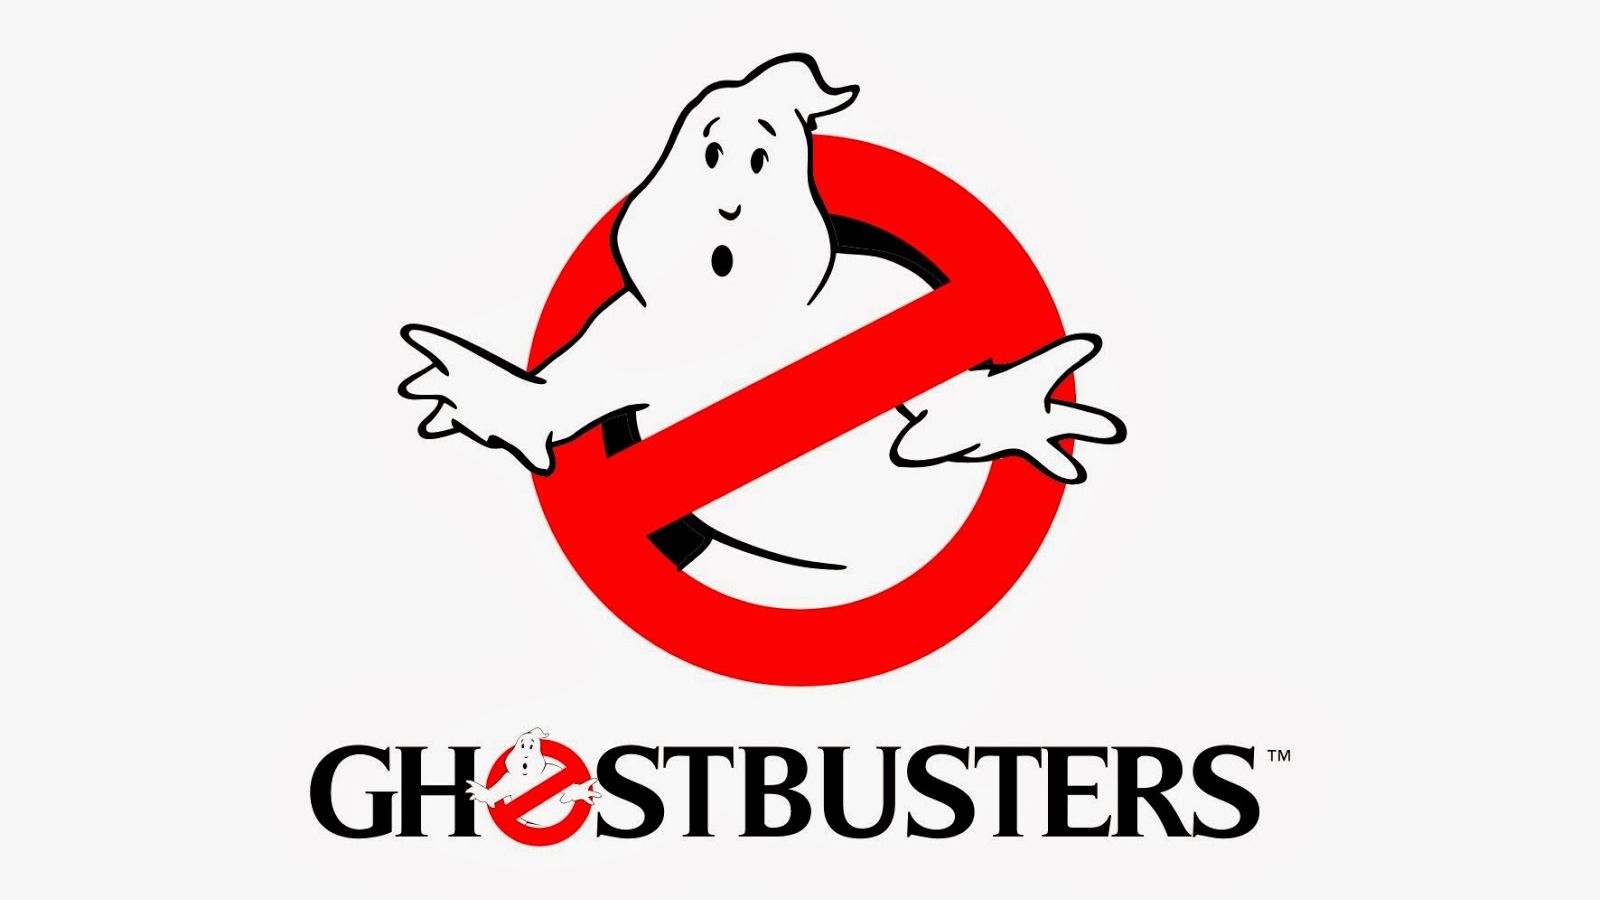 Ghostbusters Backgrounds, Compatible - PC, Mobile, Gadgets| 1600x900 px